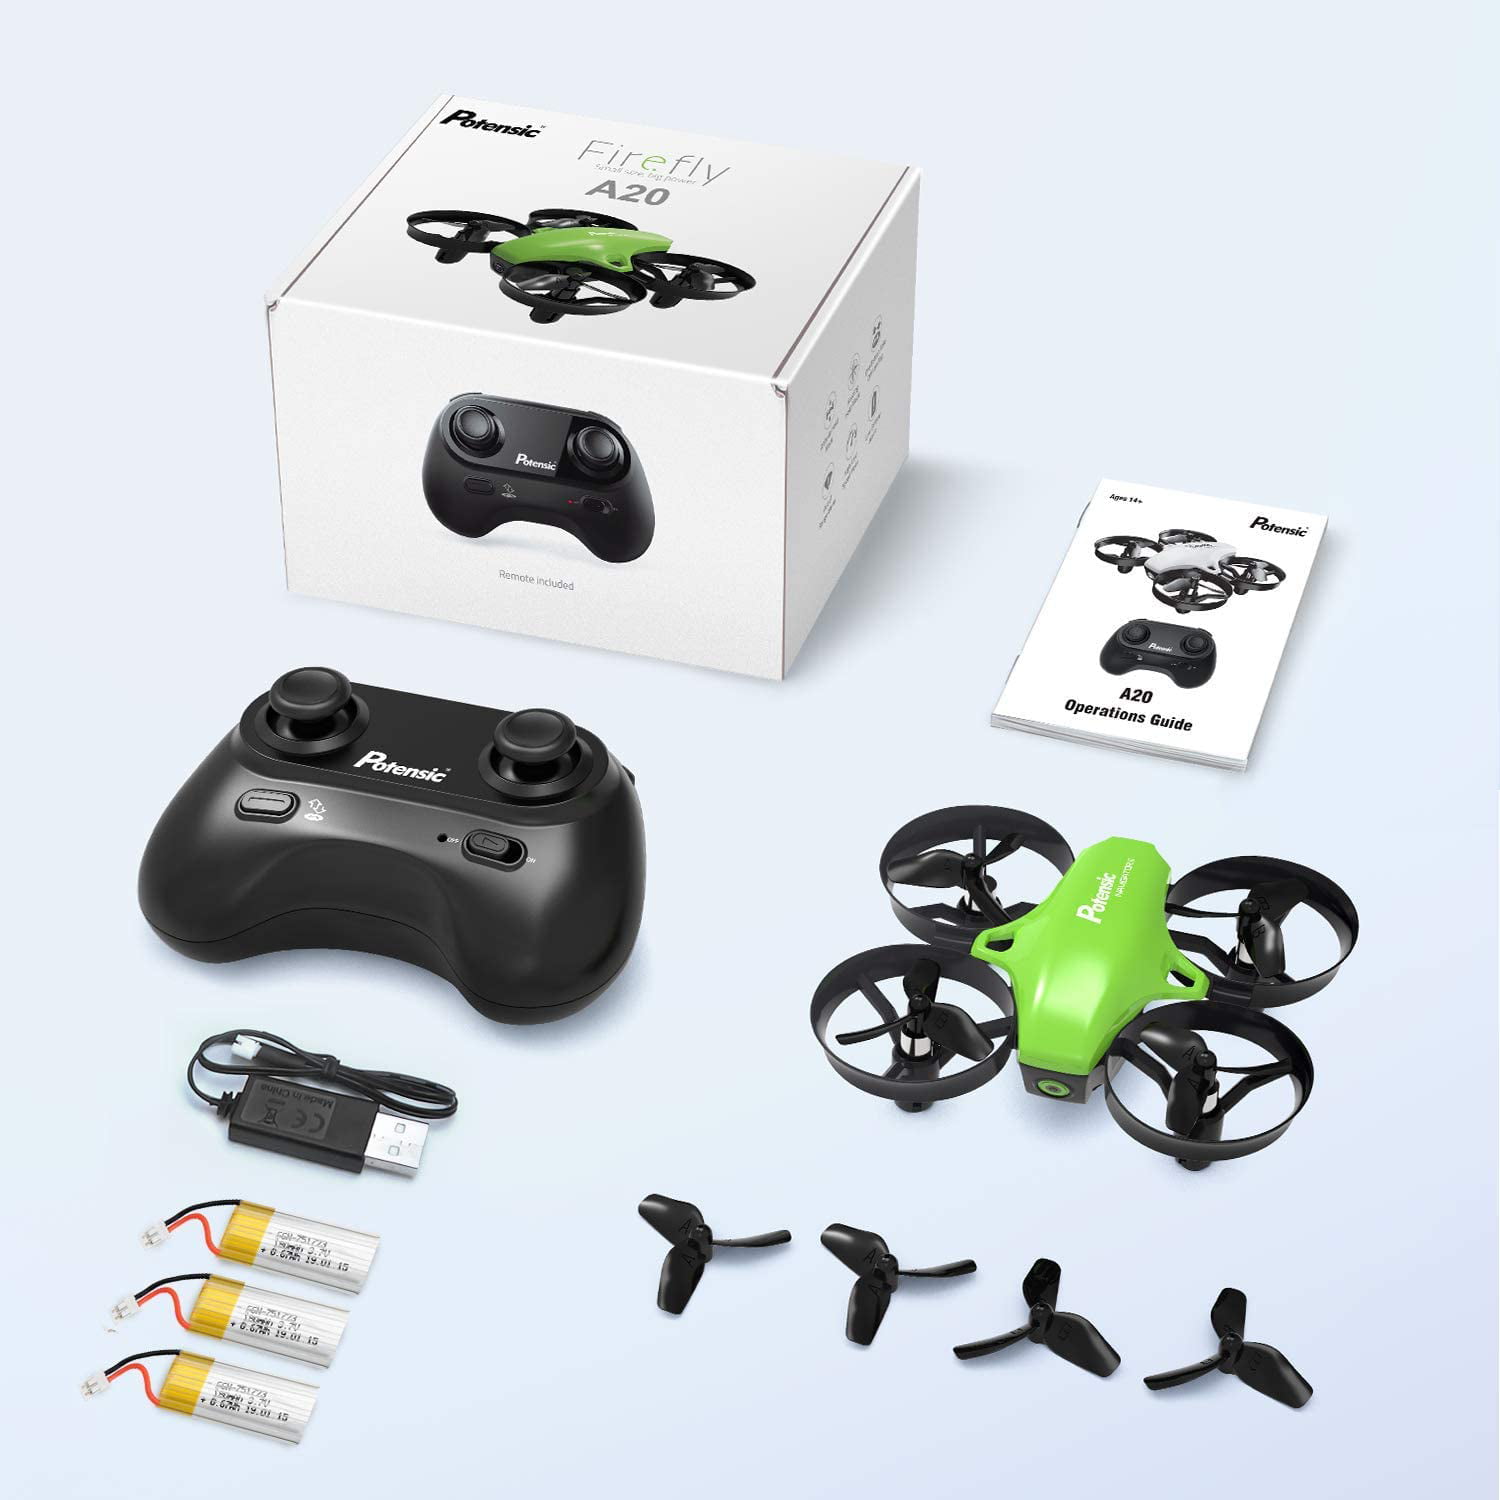 Potensic A20W Mini Drone with Camera for Kids and Beginners, 720P RC FPV  Drone, Easy to Fly Portable Quadcopter with Altitude Hold, Headless Mode,  Route Setting, Gravity Sensor, 3 Batteries 